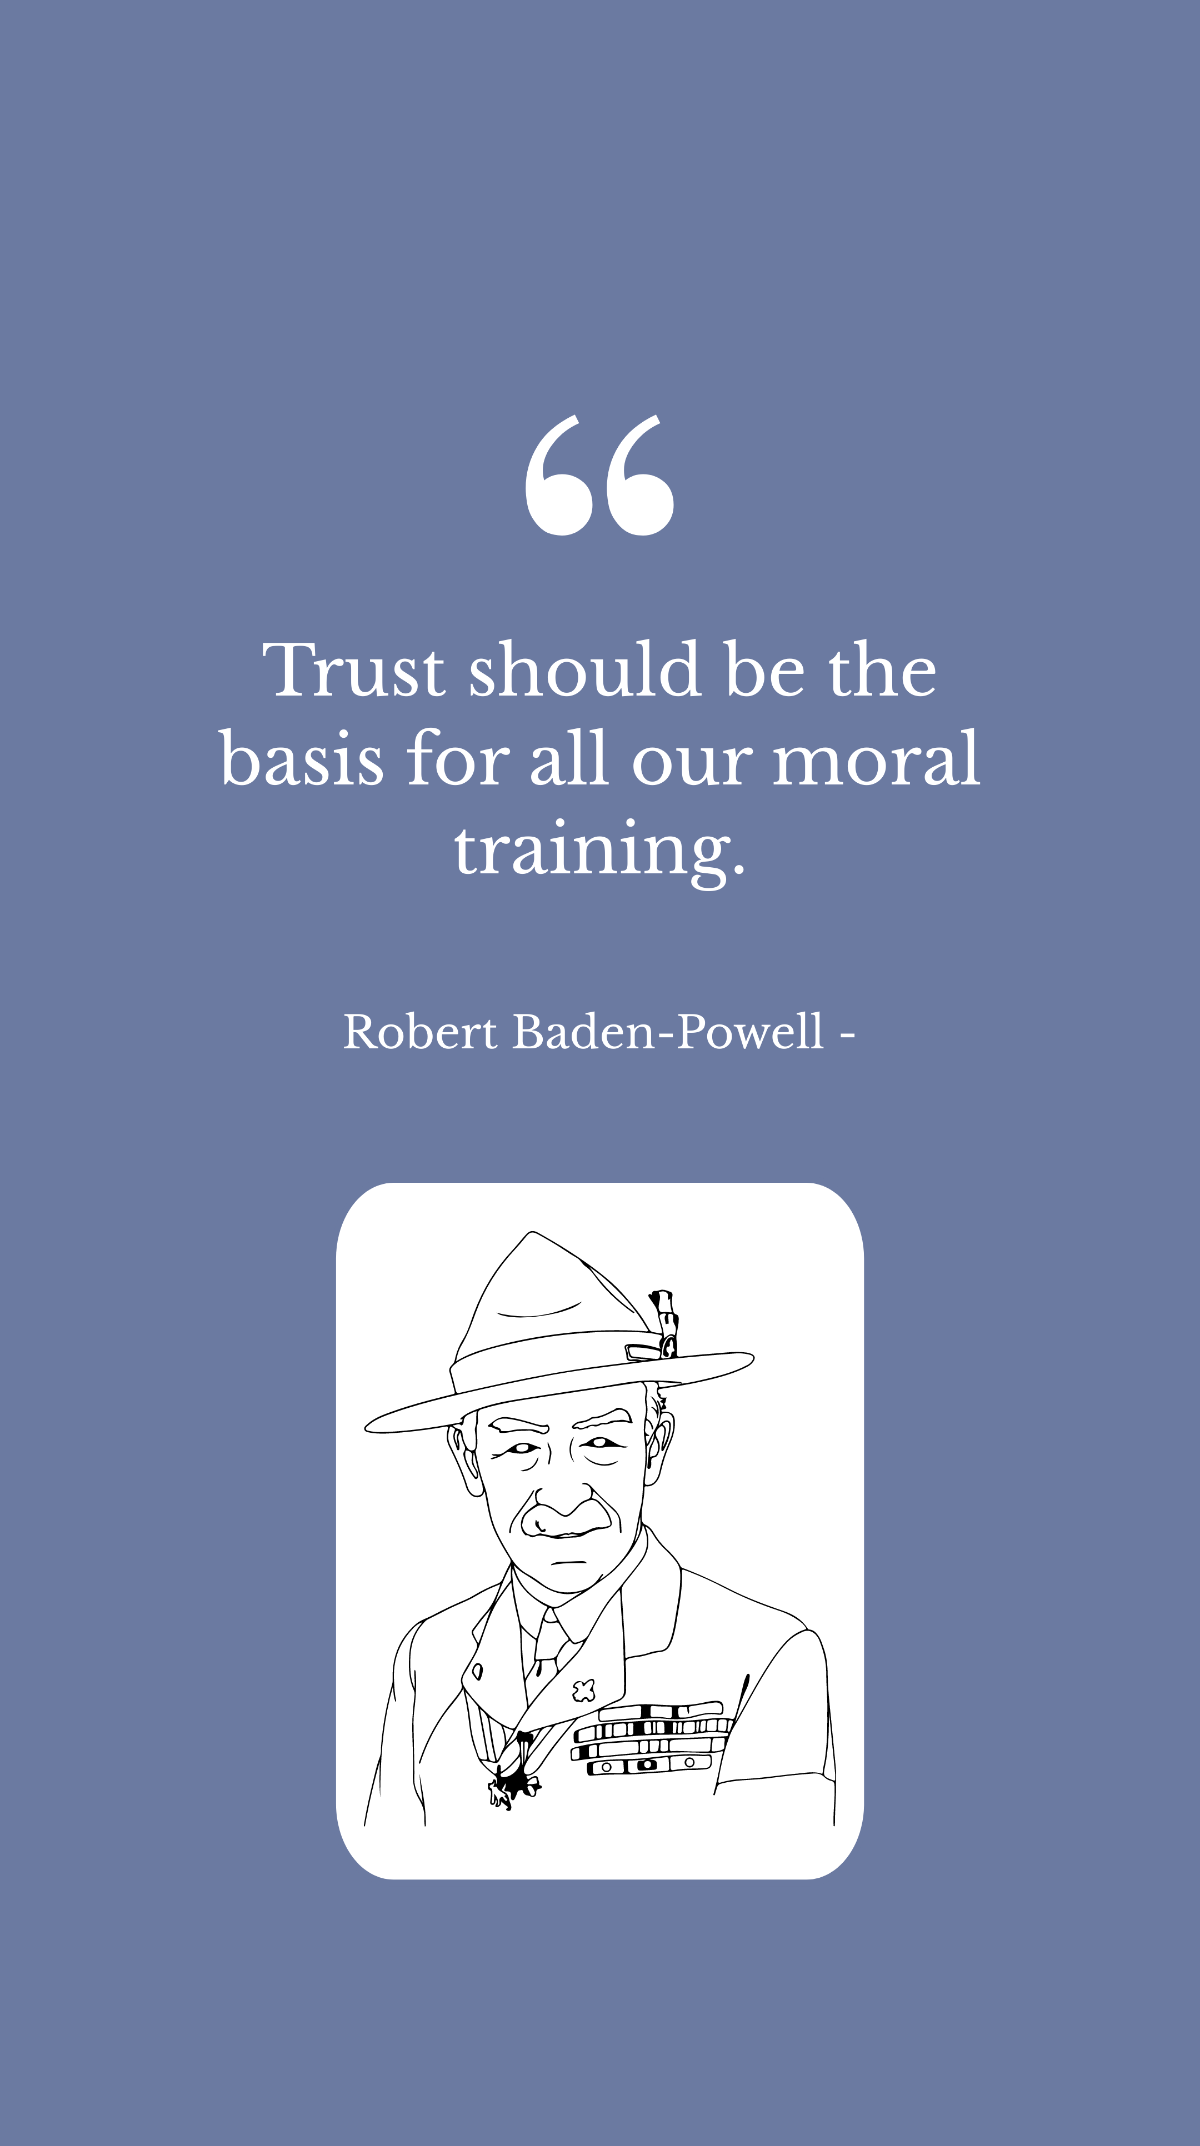 Robert Baden-Powell - Trust should be the basis for all our moral training. Template